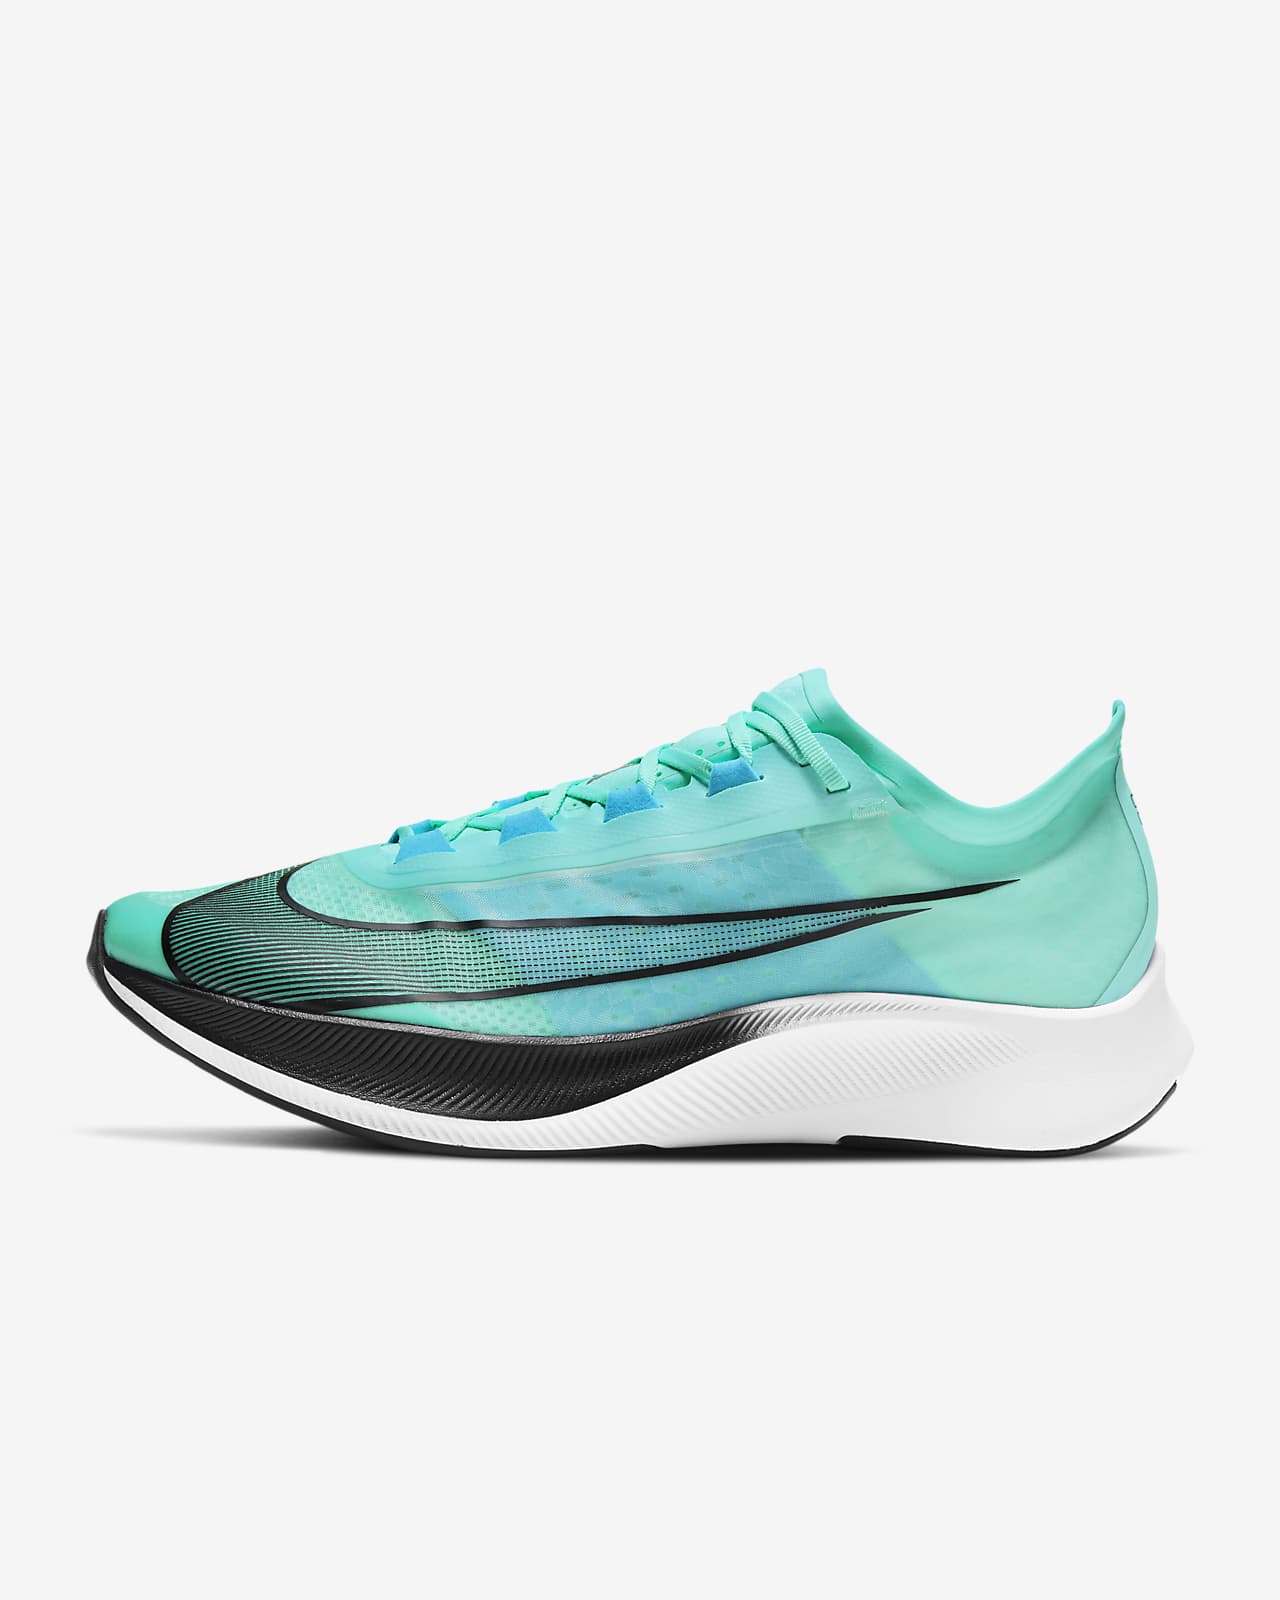 nike zoom fly 3 size 7.5